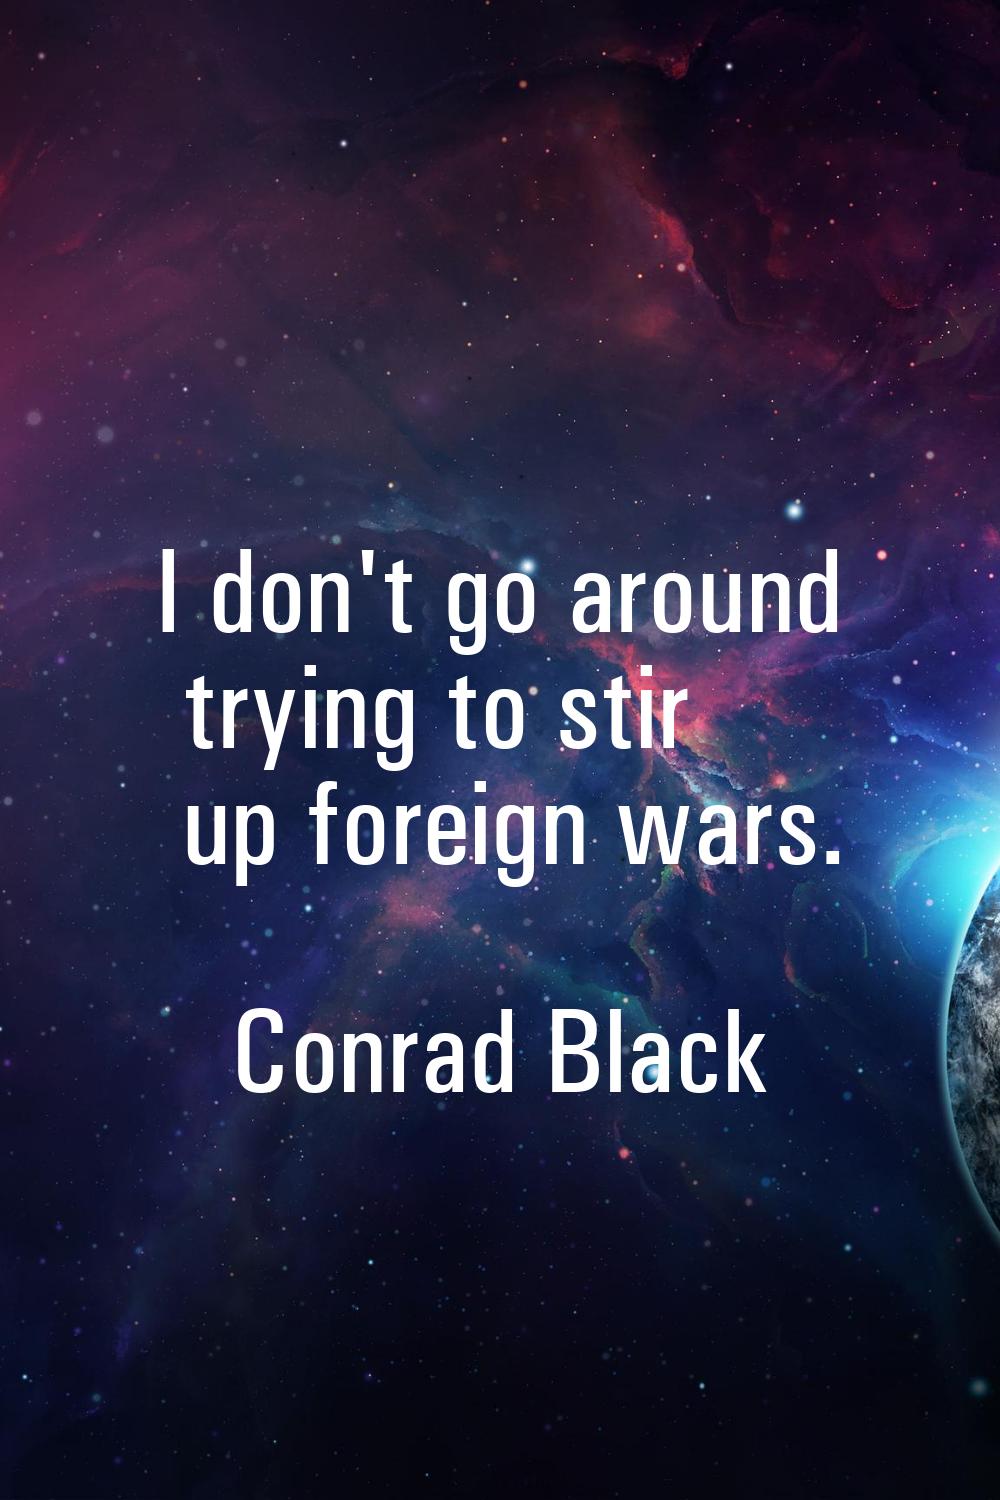 I don't go around trying to stir up foreign wars.